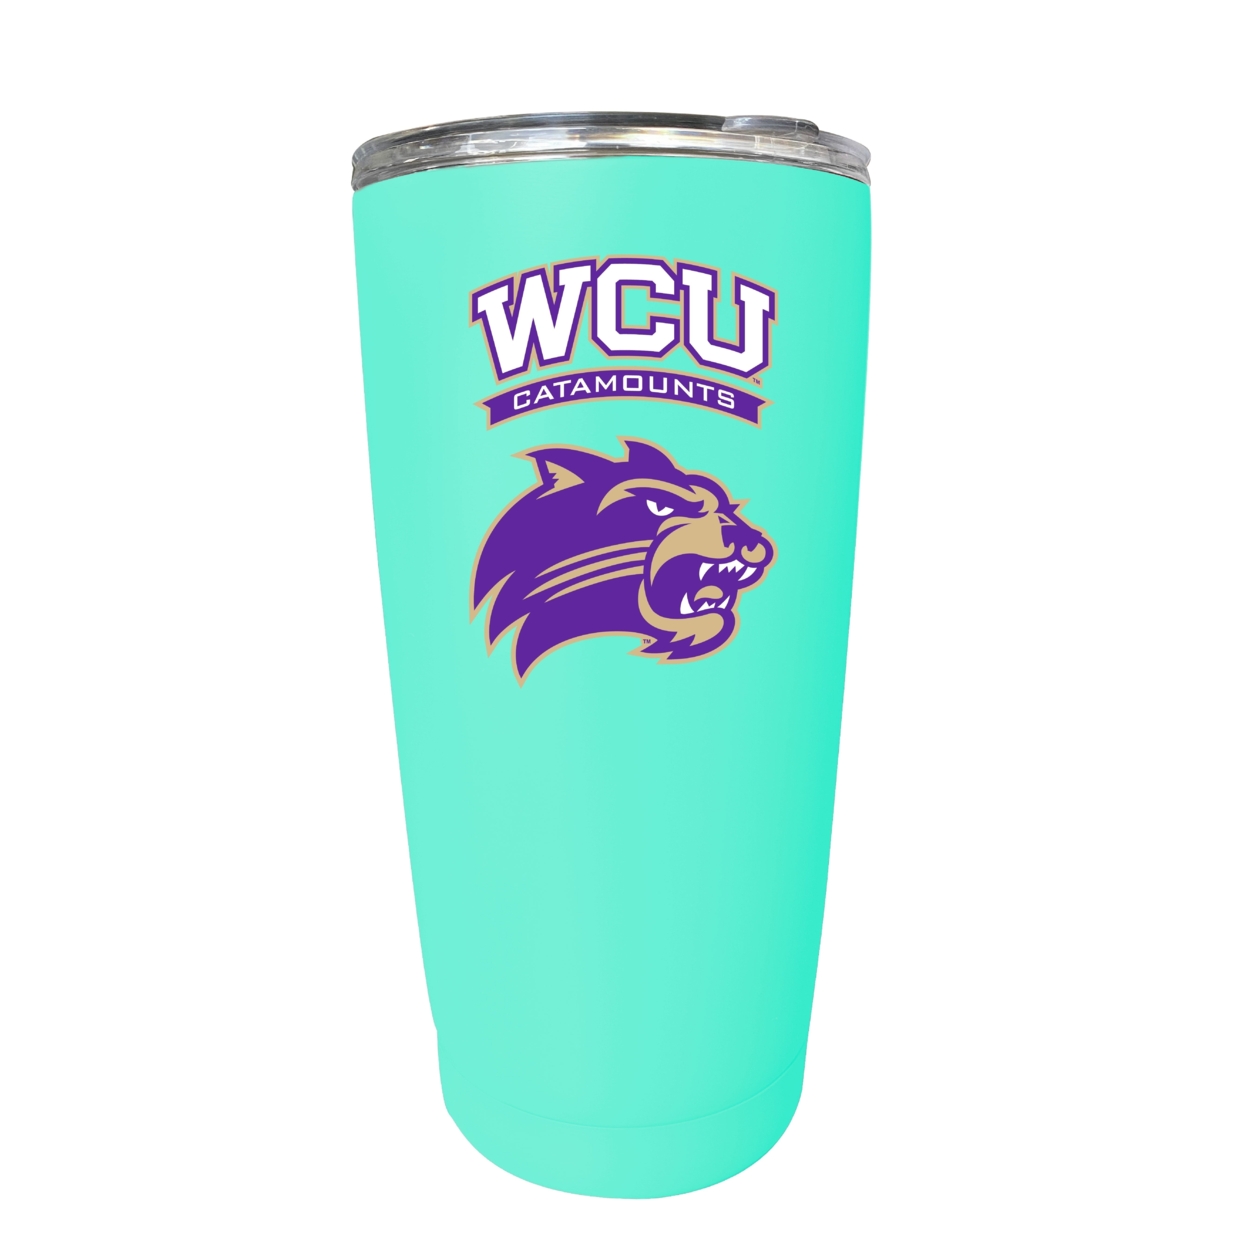 Western Carolina University 16 Oz Insulated Stainless Steel Tumbler - Choose Your Color. - Seafoam